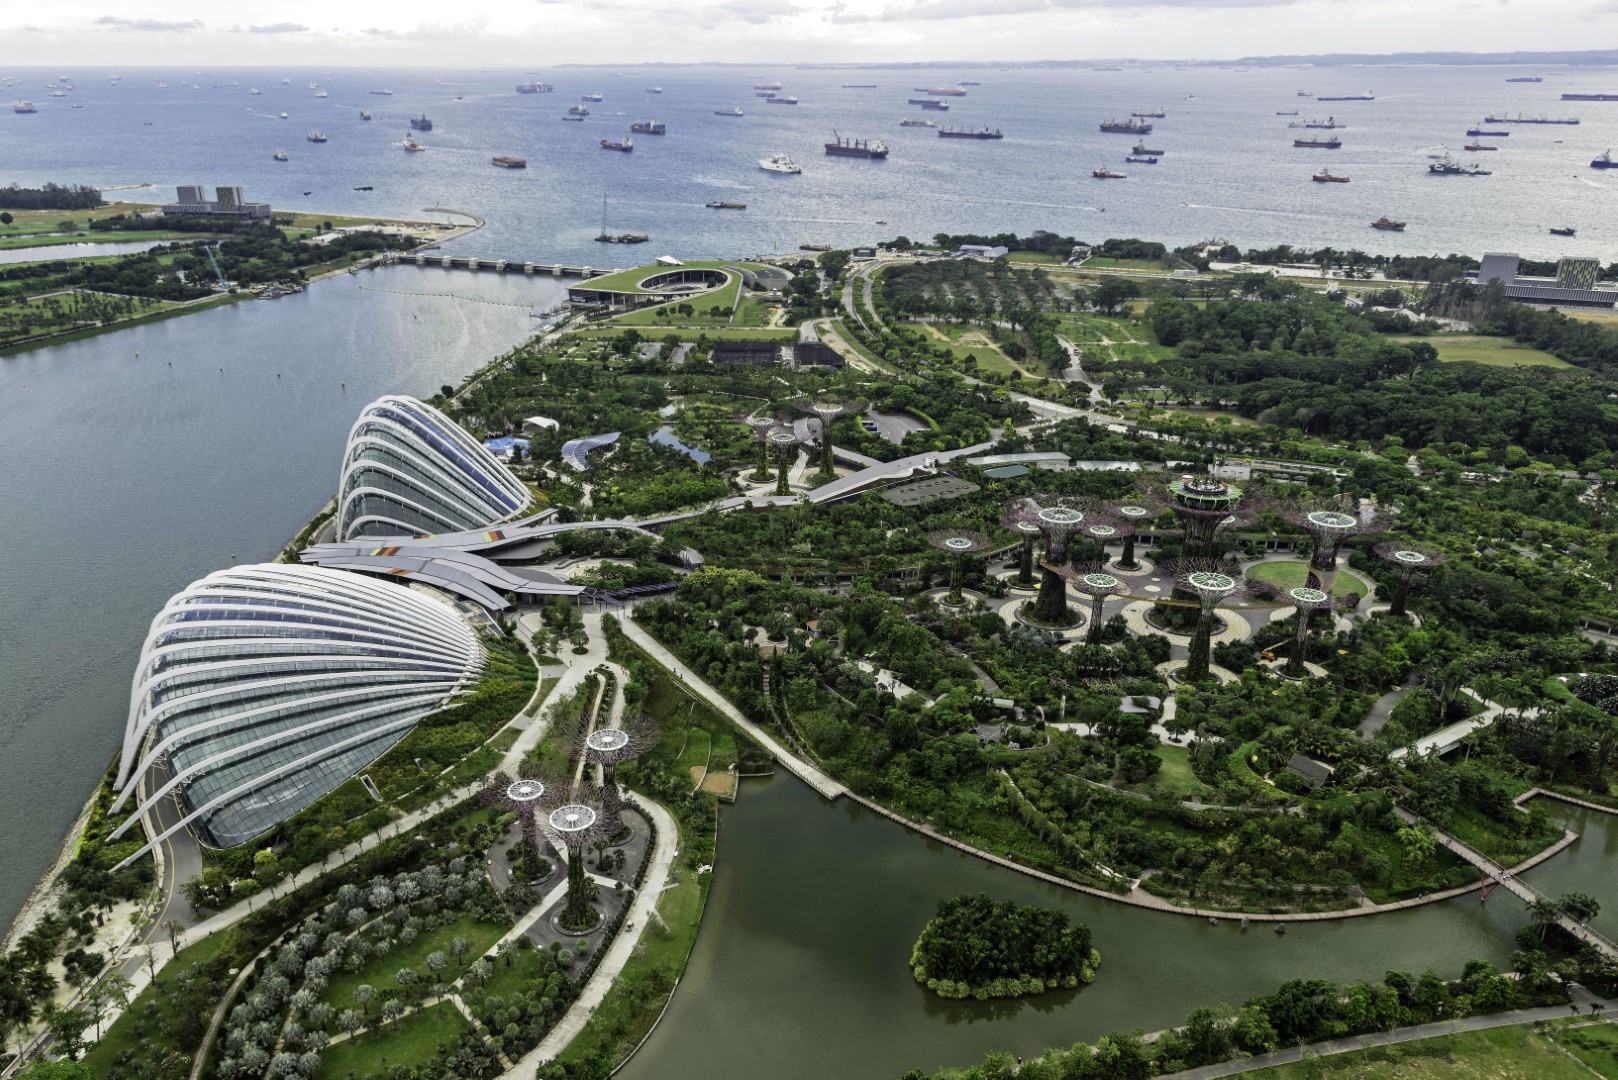 Aerial View of Gardens by the Bay, Singapore